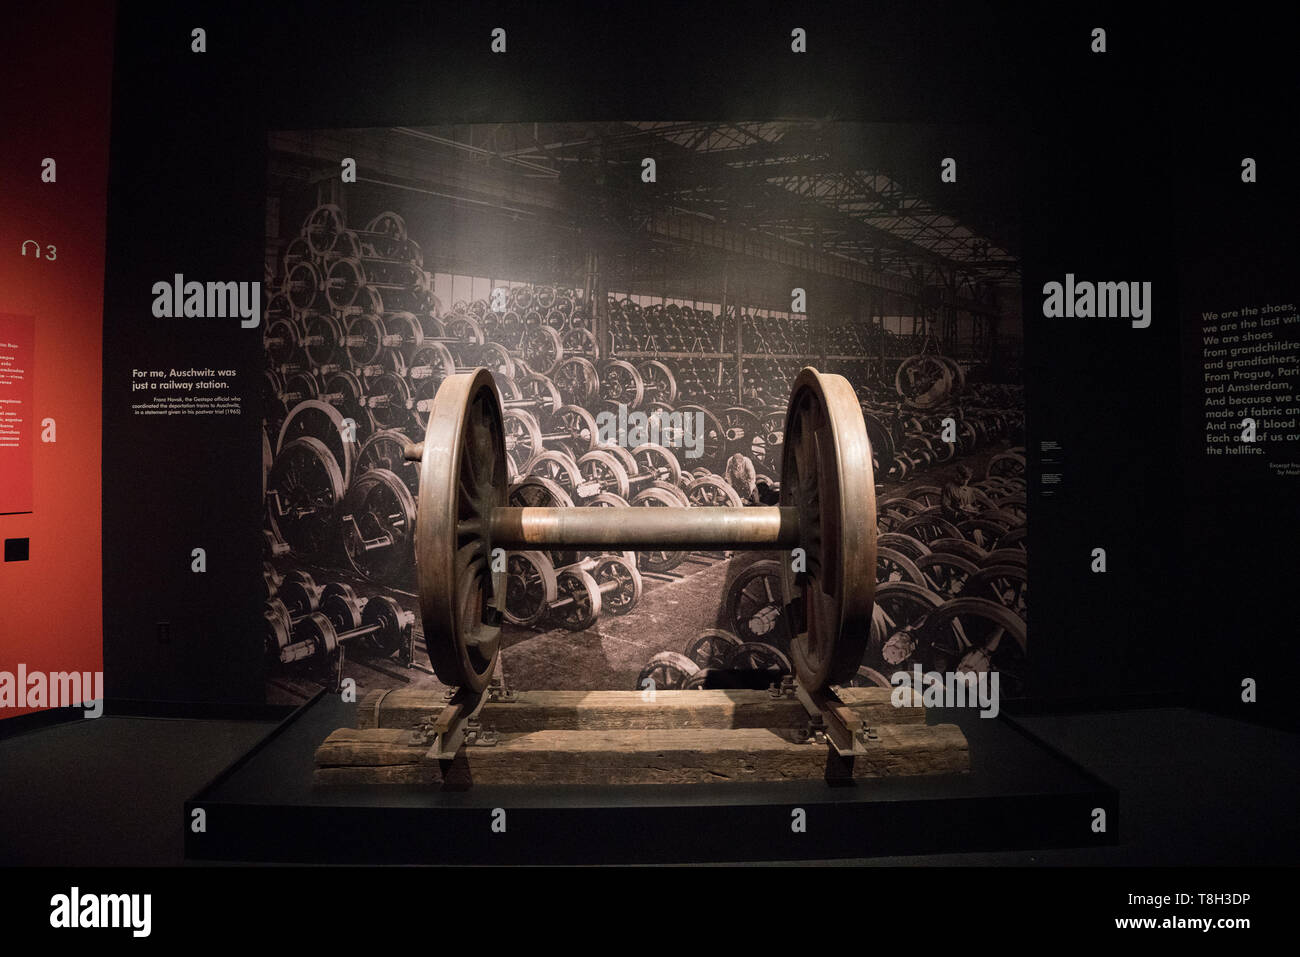 In the exhibition “Auschwitz. Not long ago. Not far away” are a set of massive wheels from a freight car like those that took victims to Auschwitz. Stock Photo